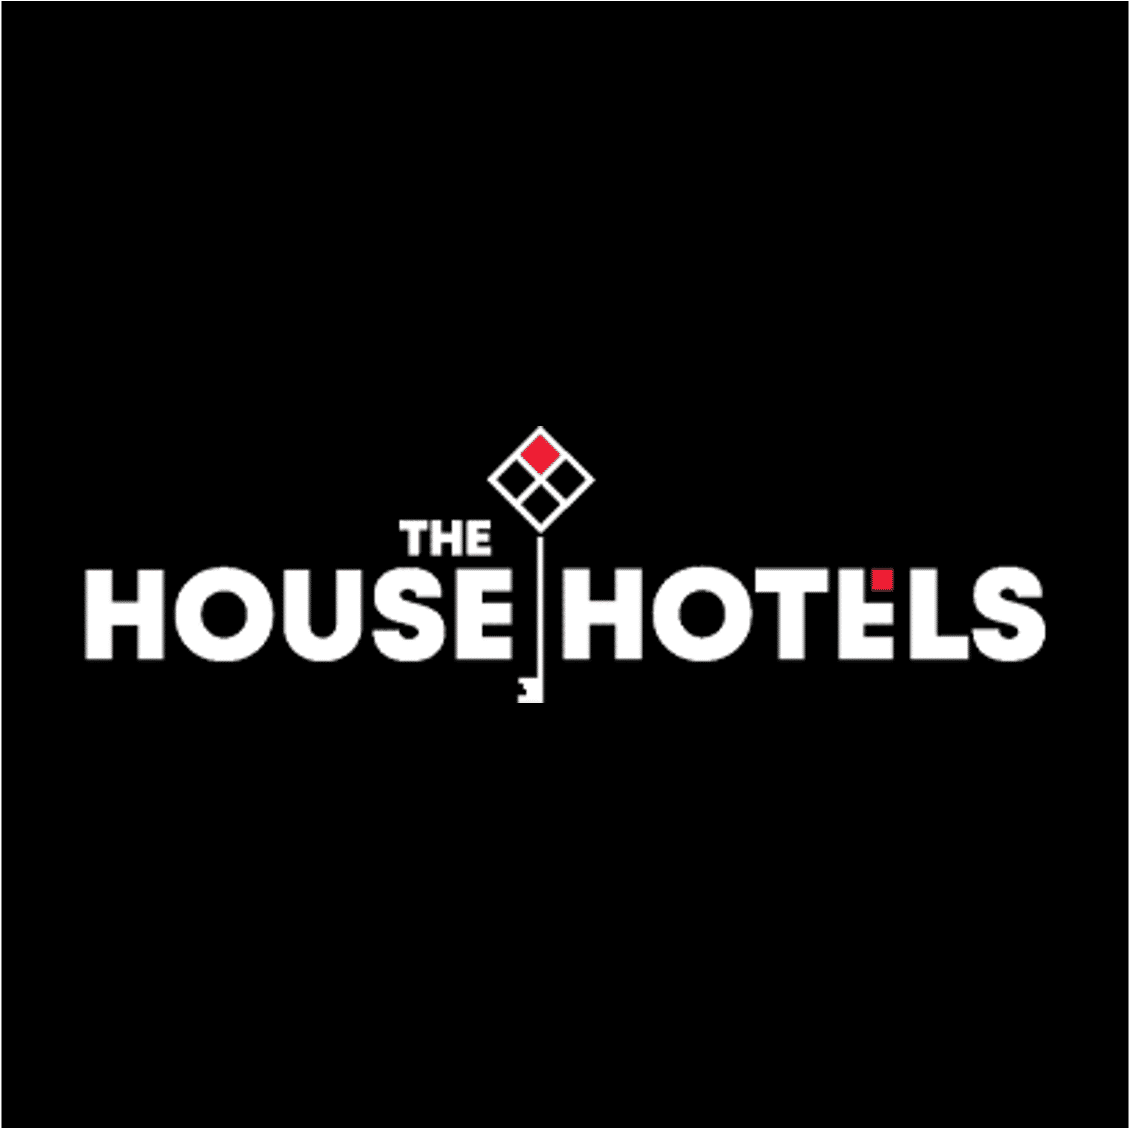 The House Hotels